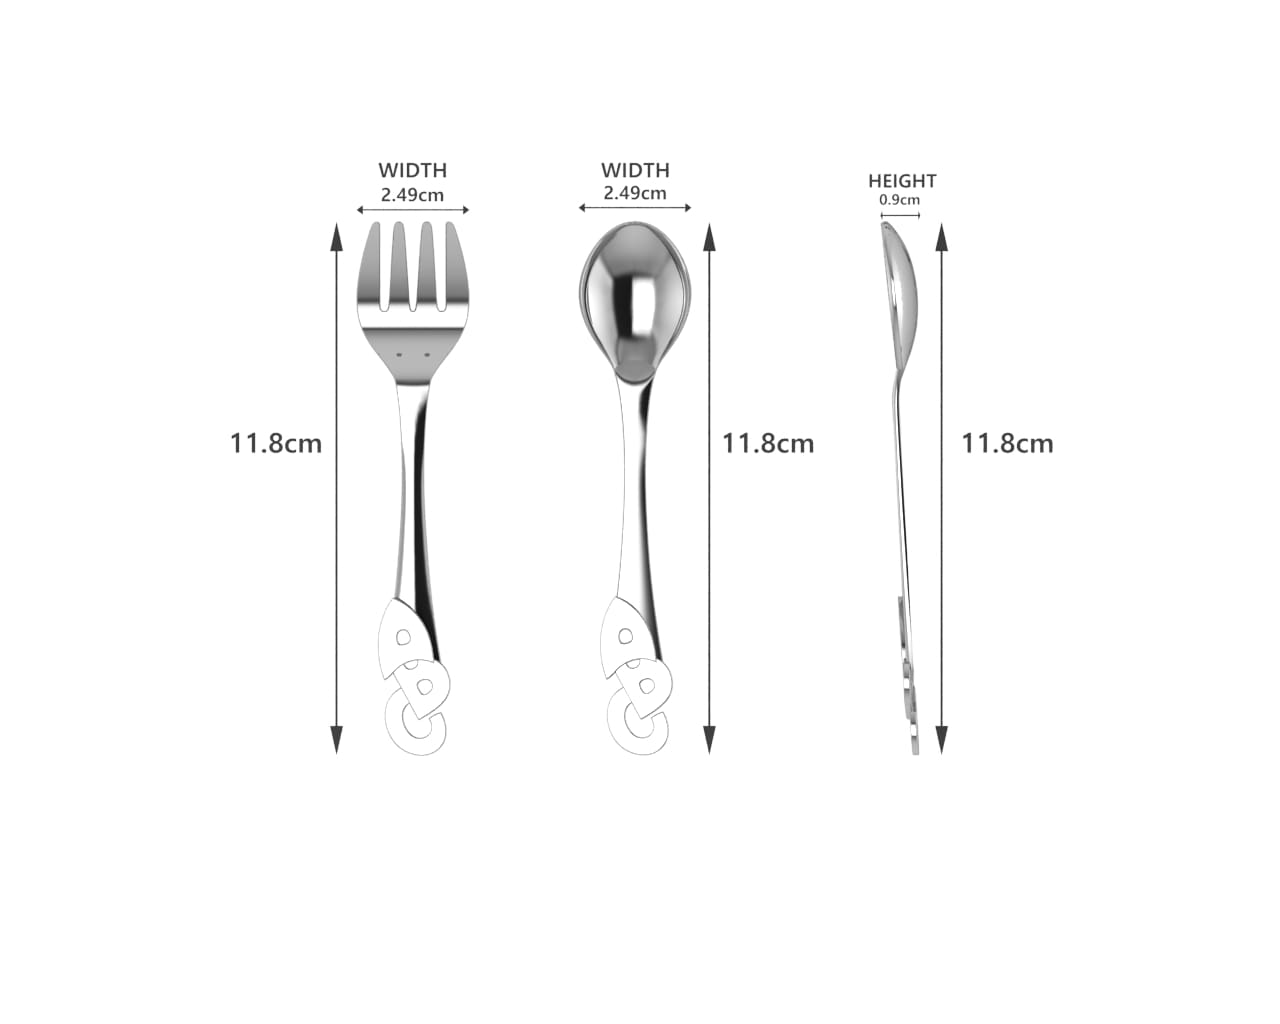 Sterling Silver Baby Spoon & Fork Set - The ABC set